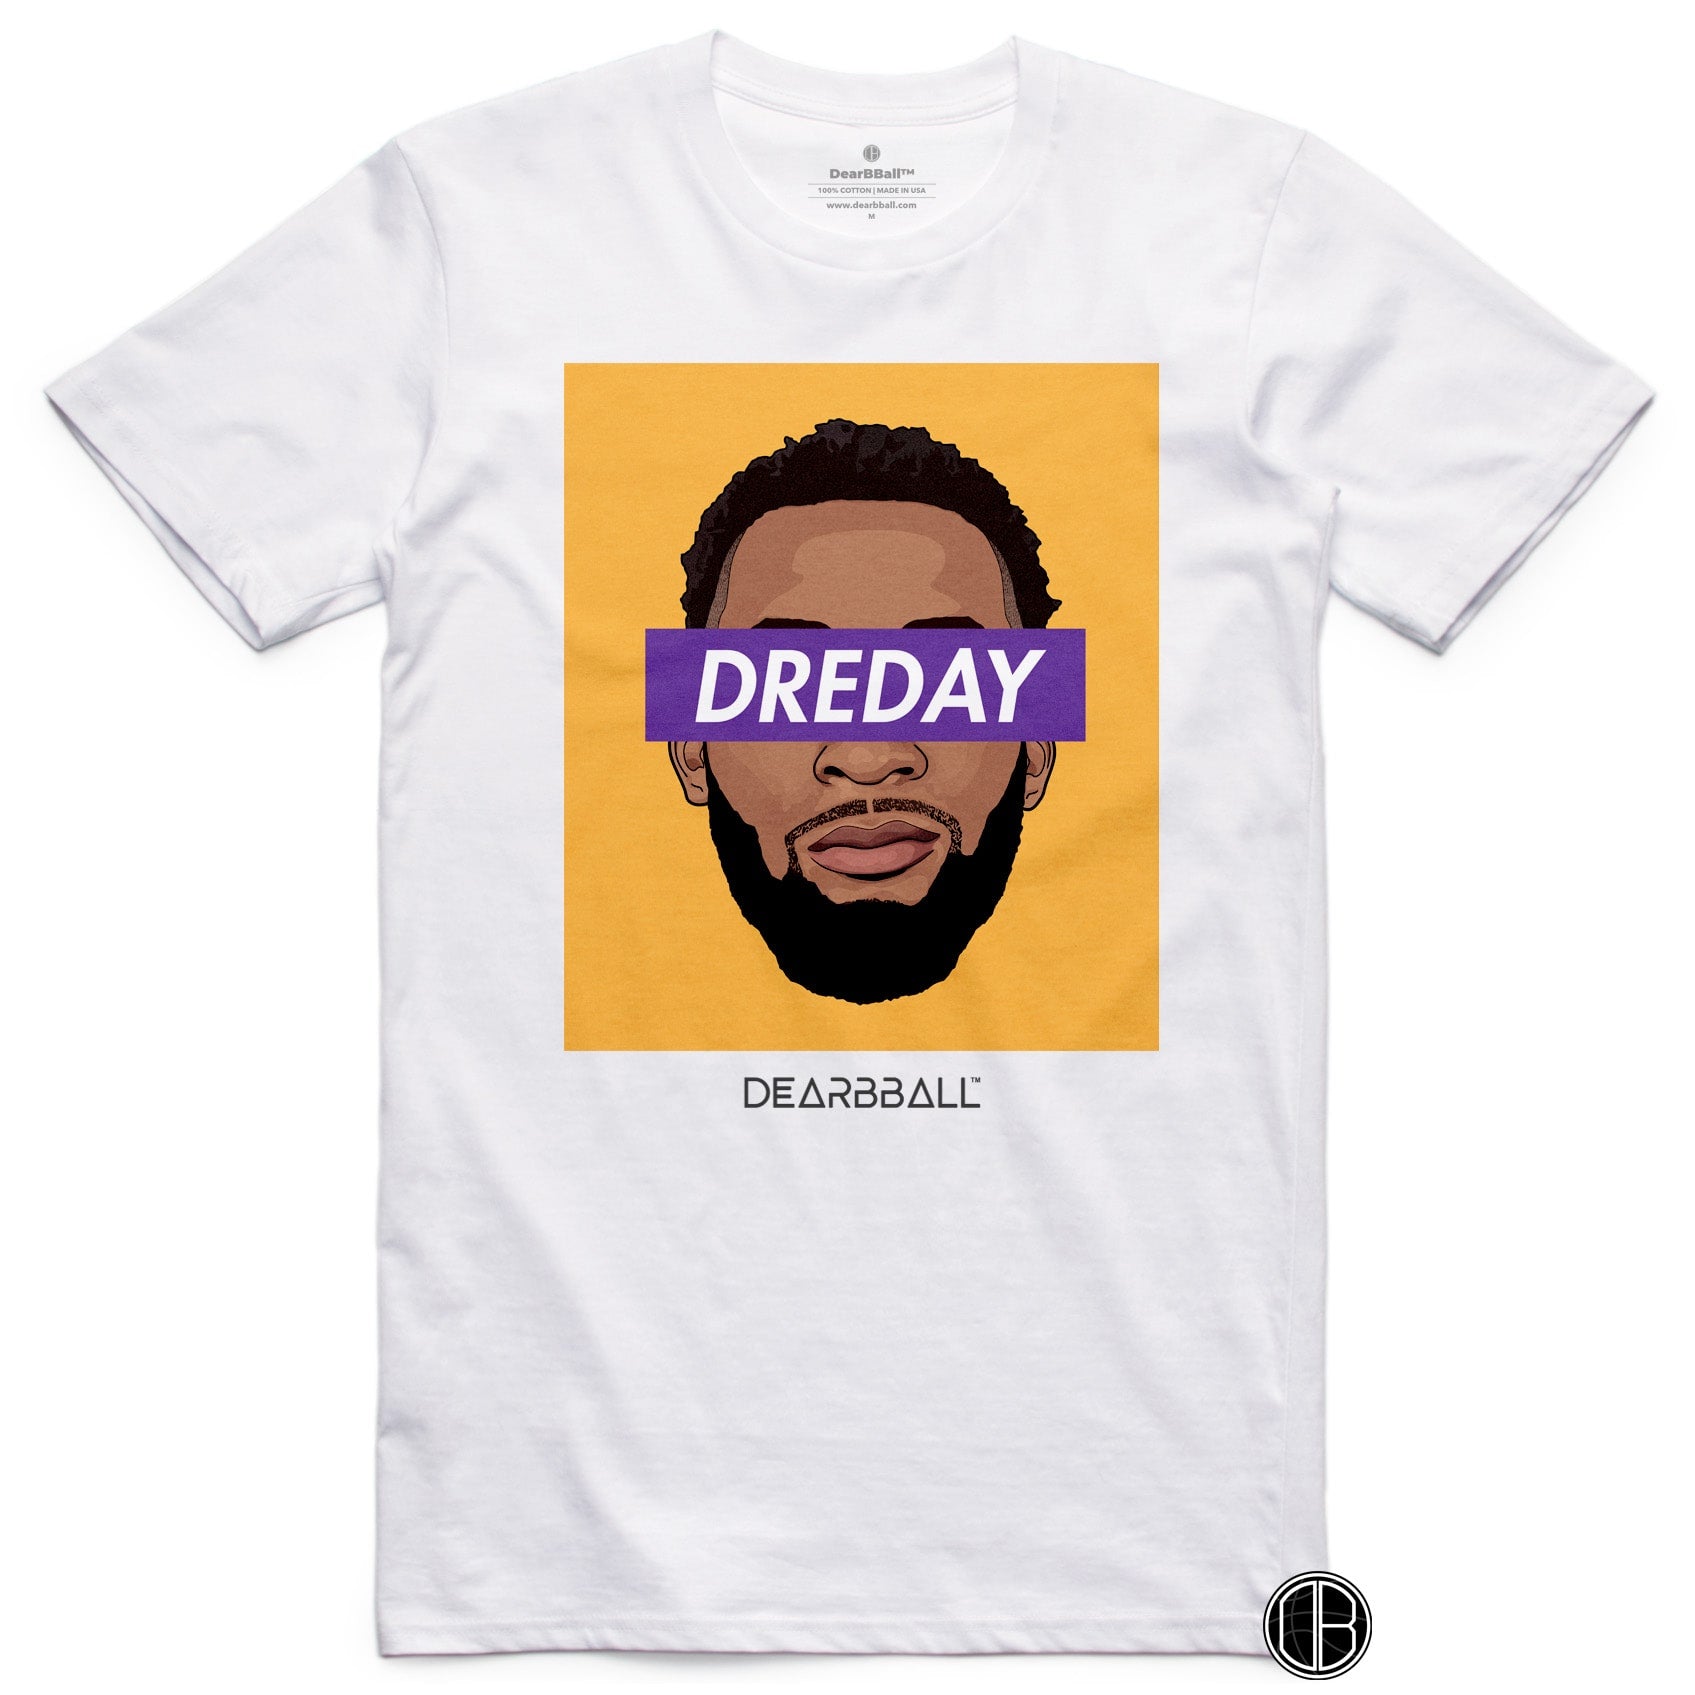 Andre Drummond T-Shirt - DRE DAY Yellow Los Angeles Lakers Basketball Dearbball white